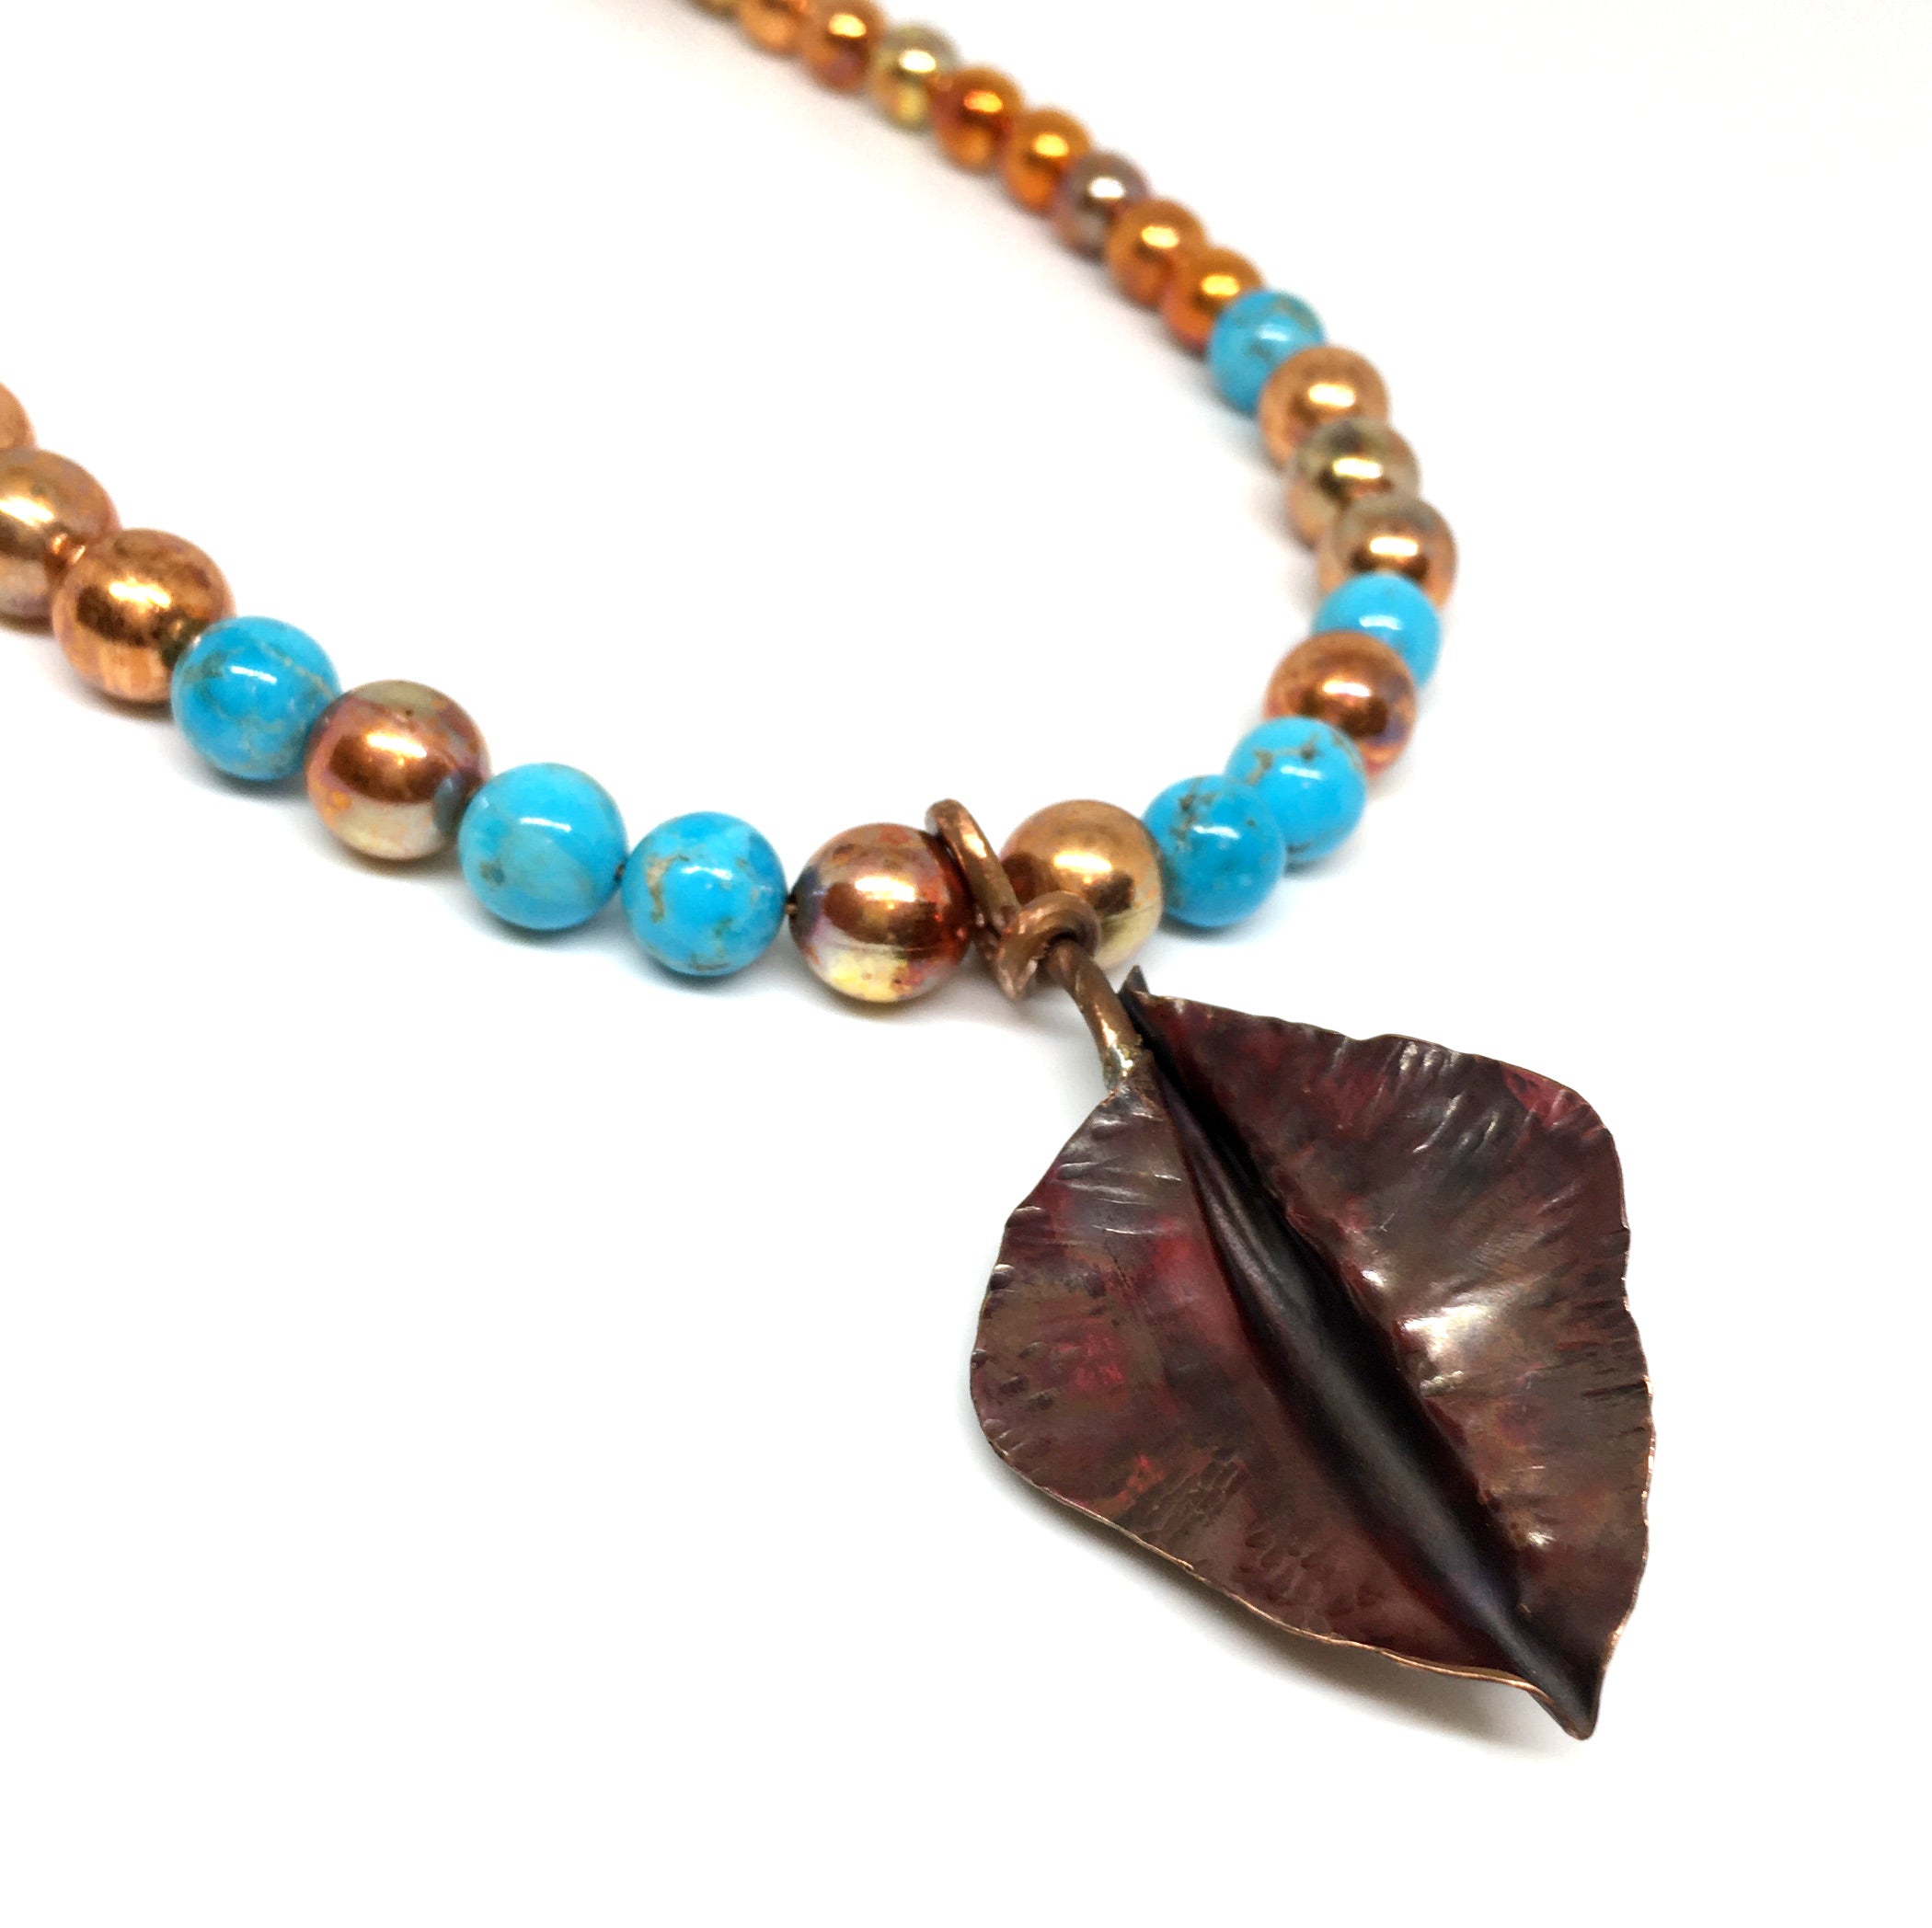 Kingman Turquoise and Flame Painted Copper Necklace with Hand Forged Copper Leaf - Sonoran Sunset Collection